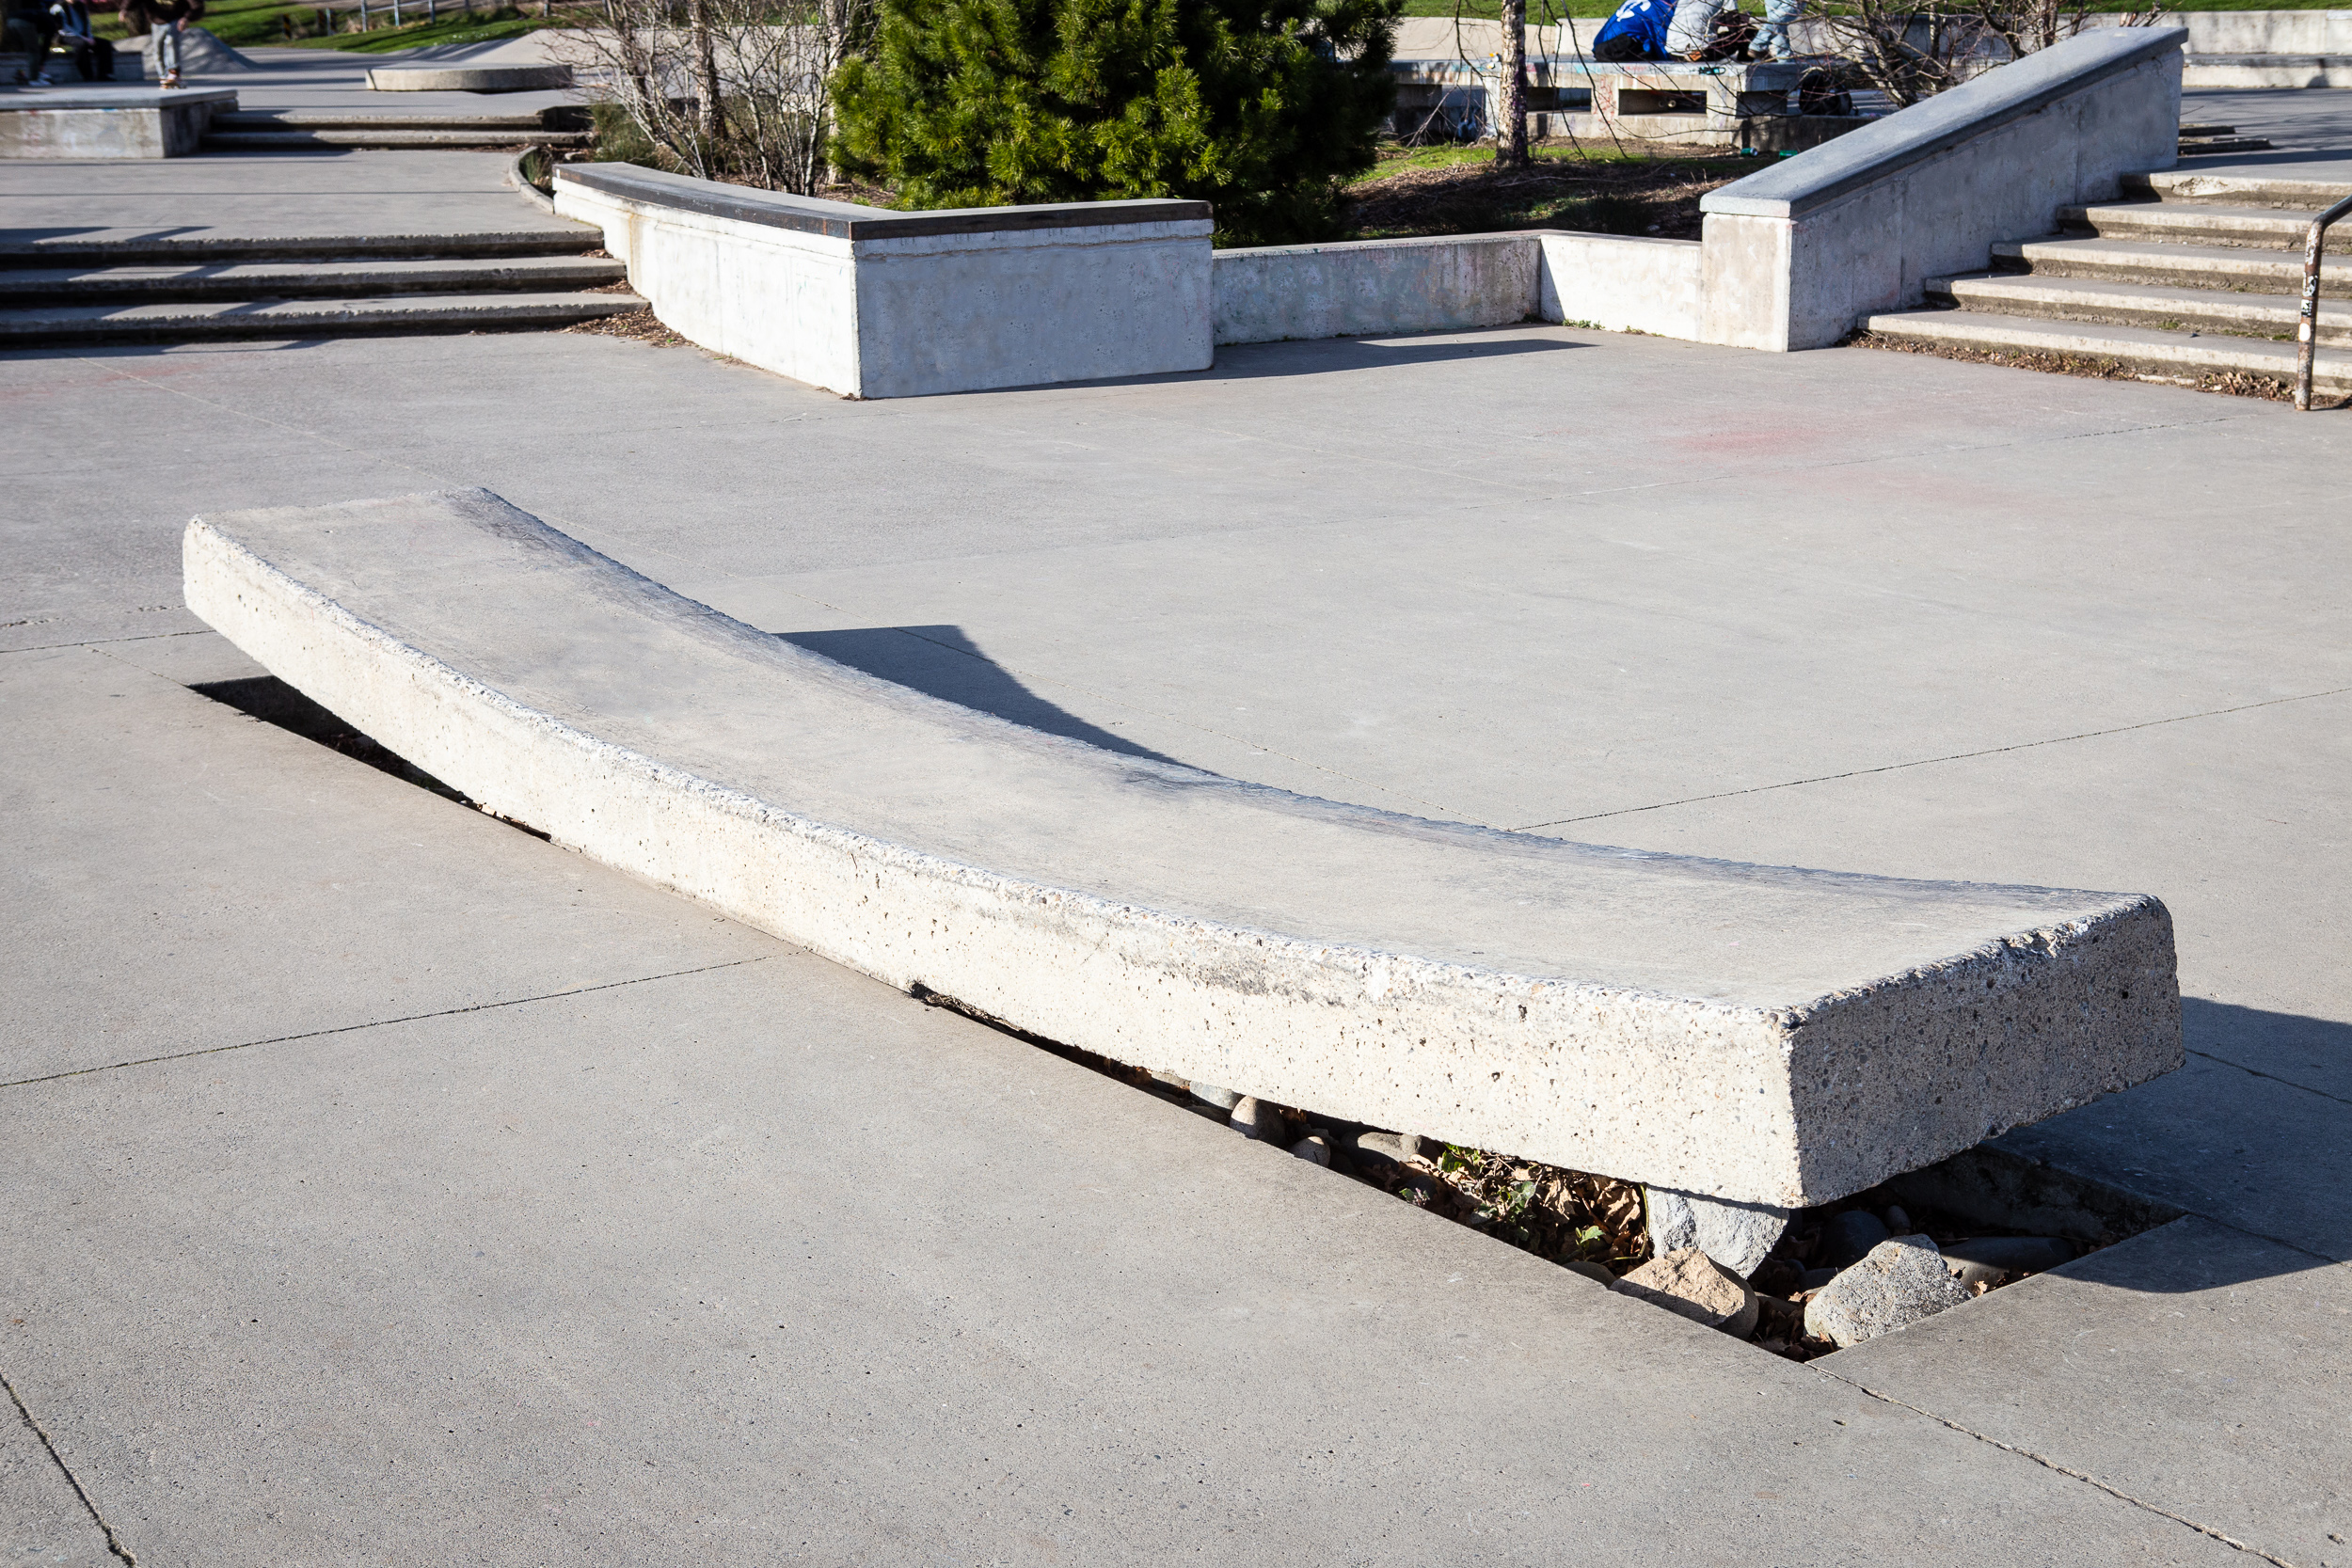  Creative ledges and other functional forms are important to the overall experience at Ed Benedict Skate Plaza. 